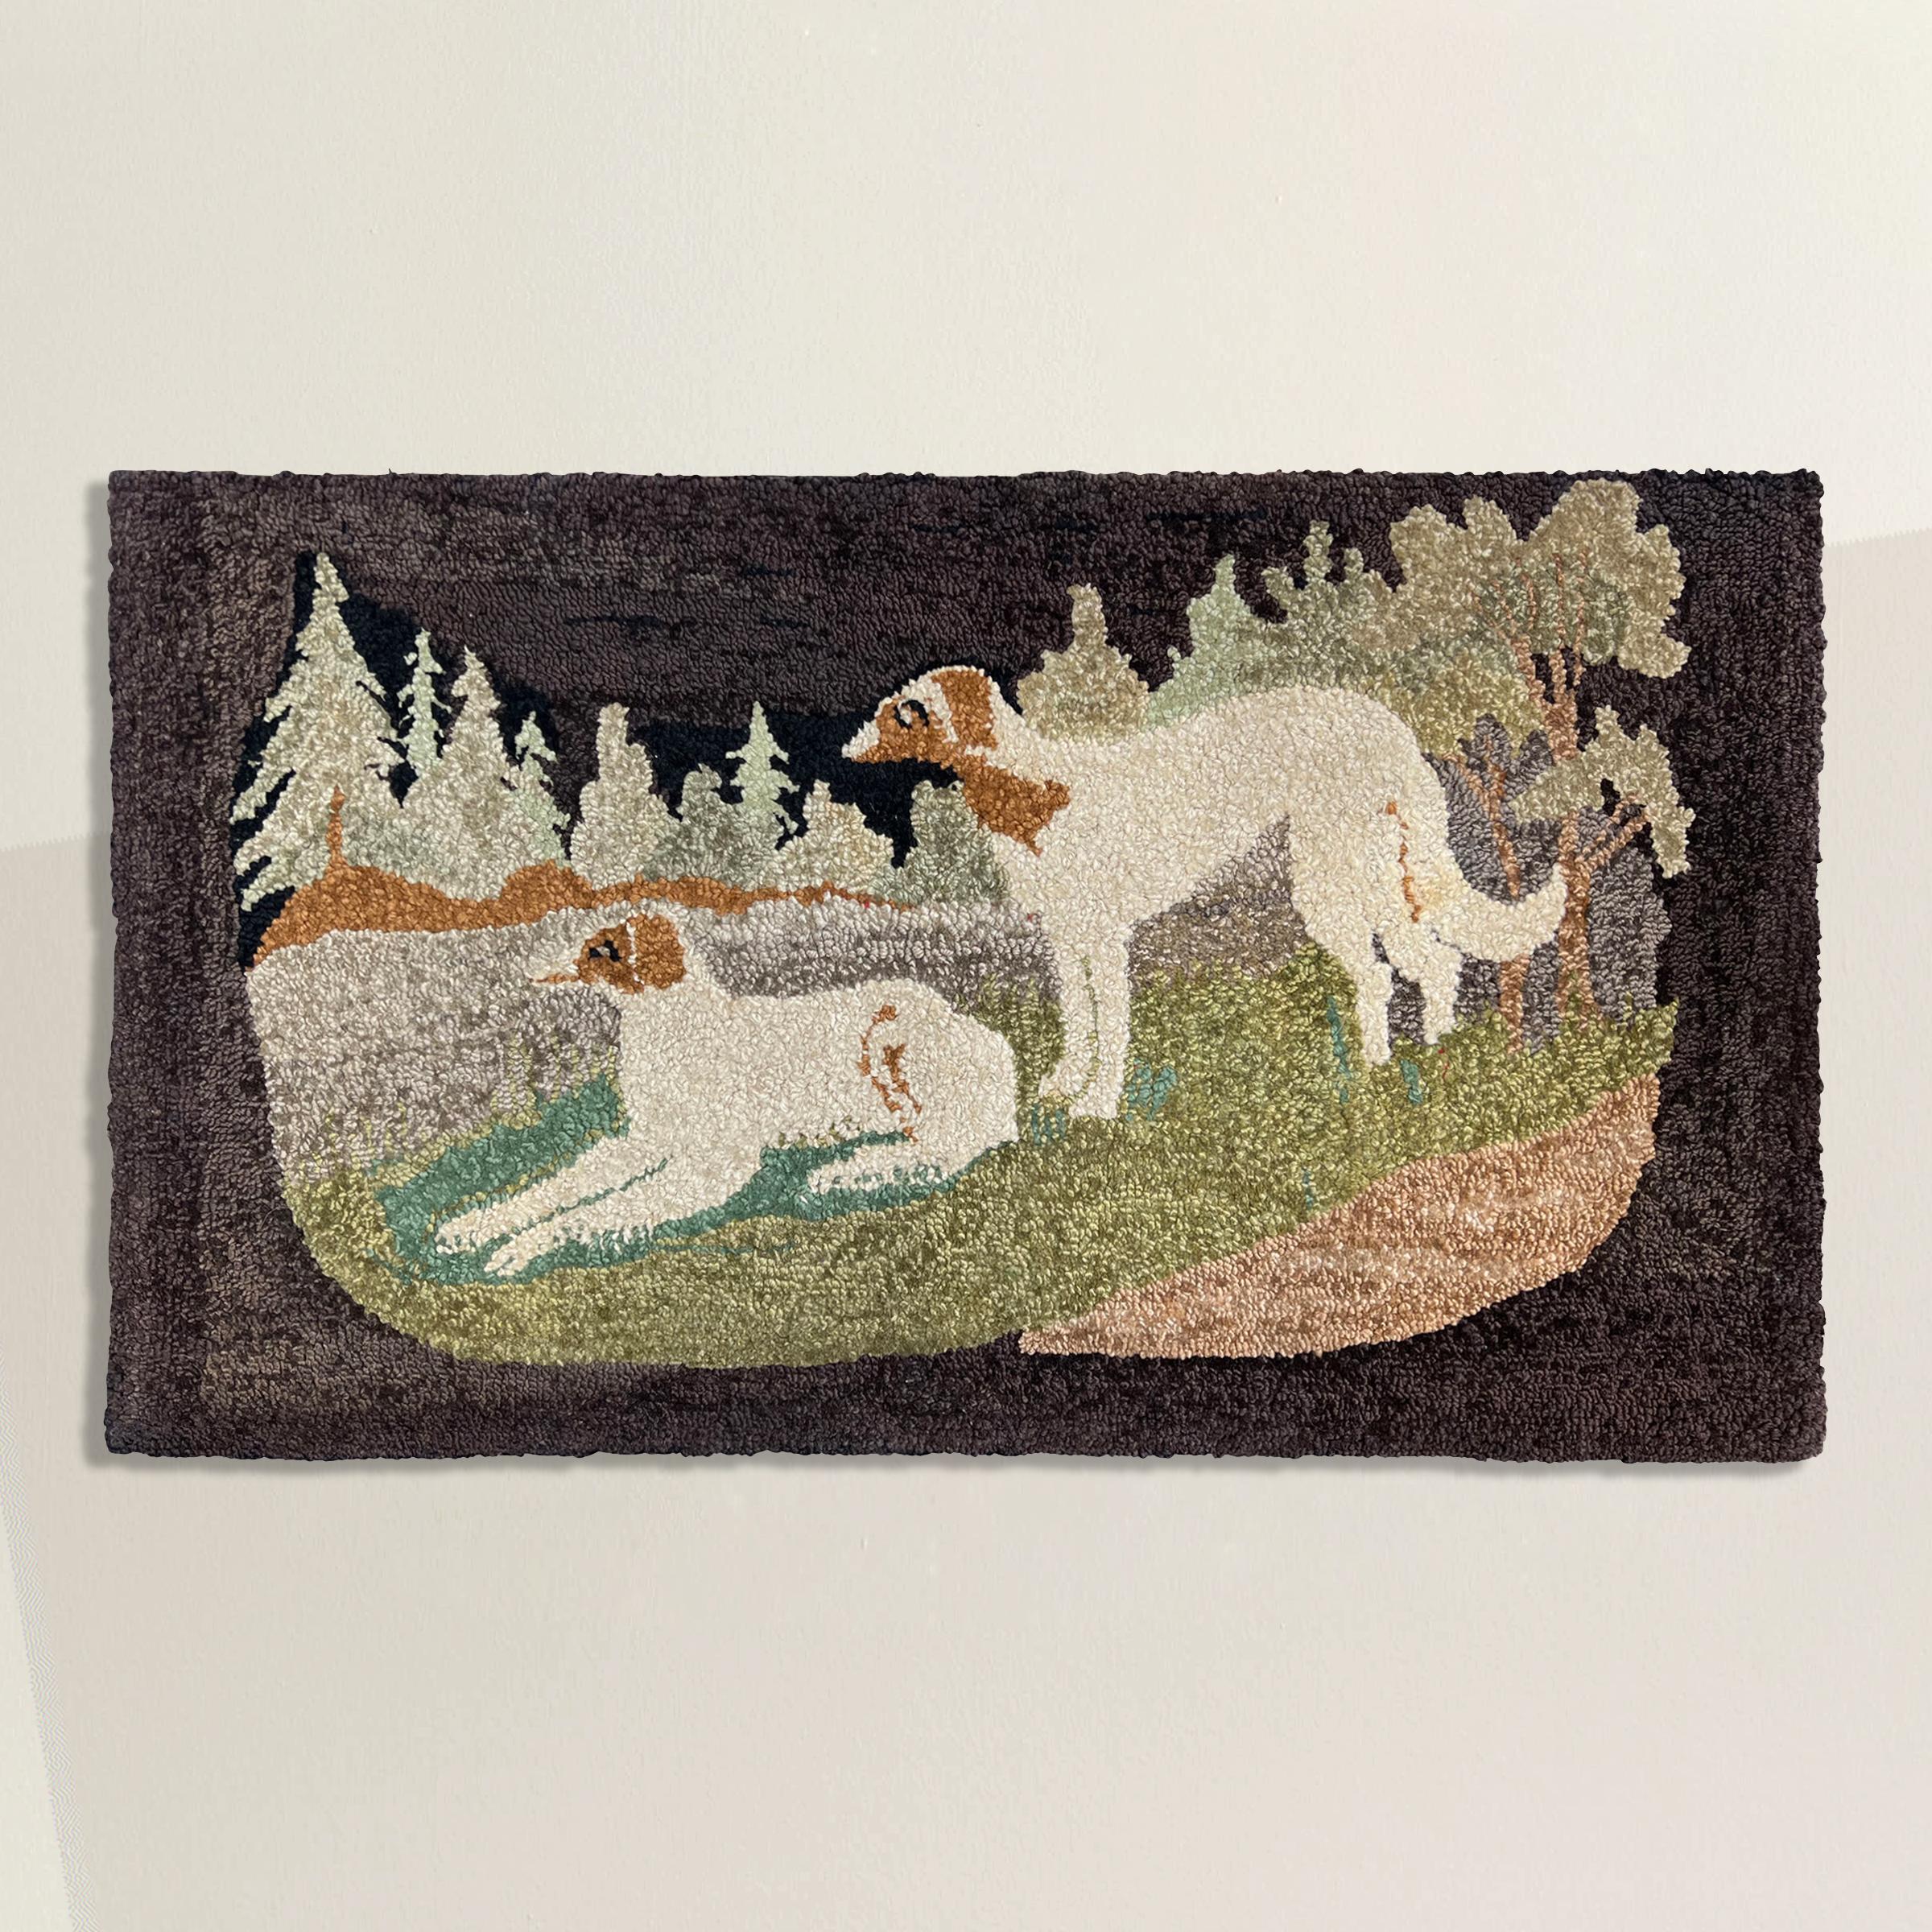 This late 19th-century American hooked rug is a captivating reflection of both its era and the rich history of the hooked rug craft in early American interior design. With meticulous artistry, it portrays two white and brown wolfhounds at rest on a